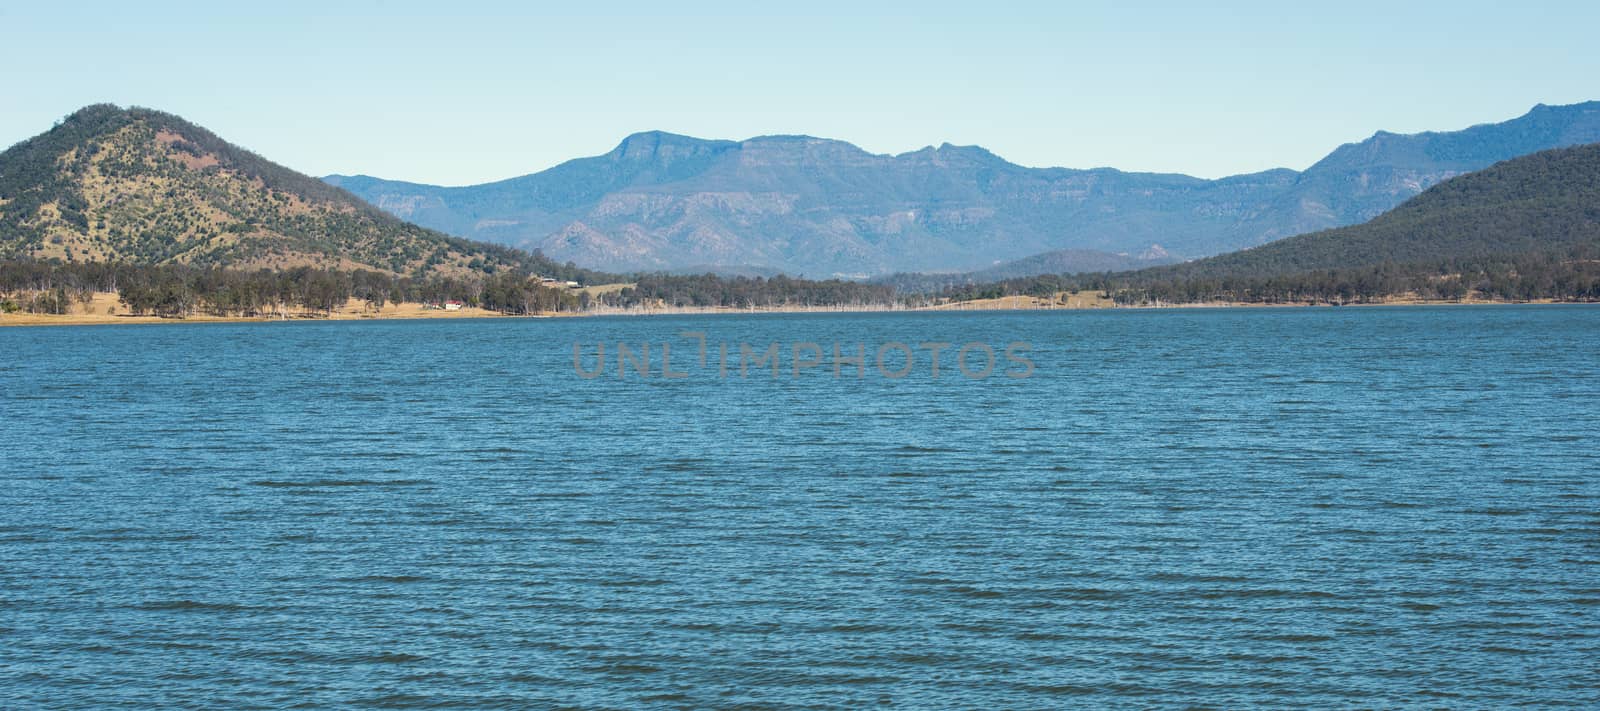 Lake Moogerah on the Scenic Rim in Queensland during the day